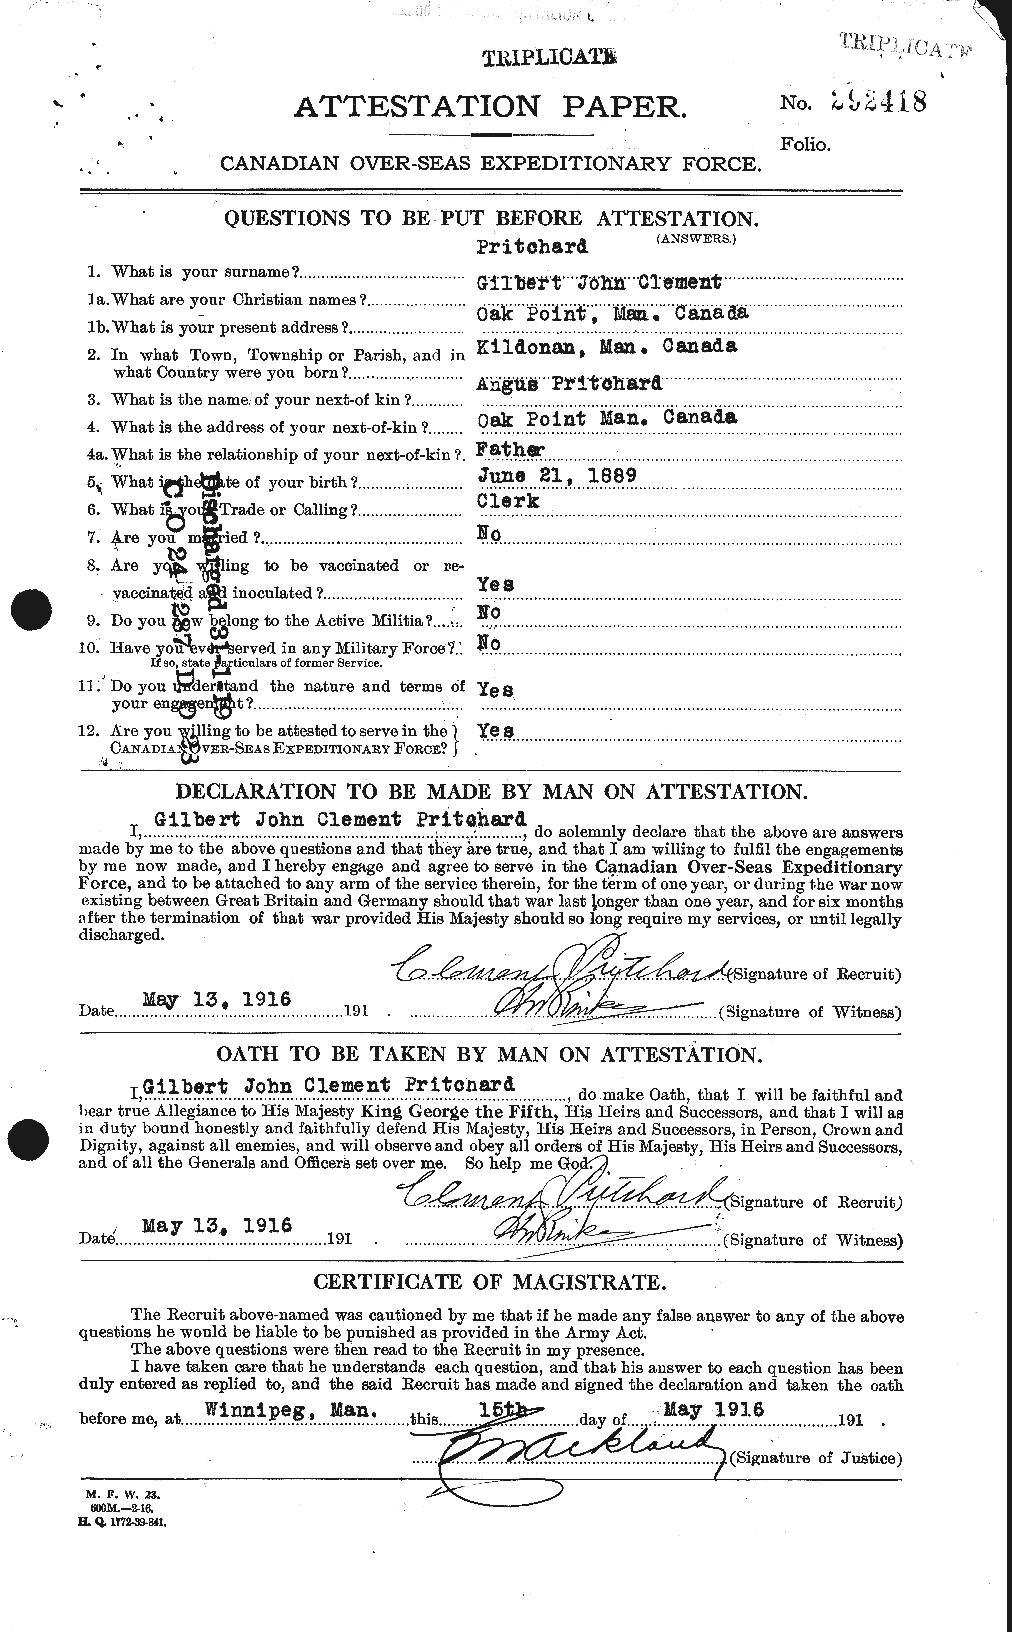 Personnel Records of the First World War - CEF 588538a